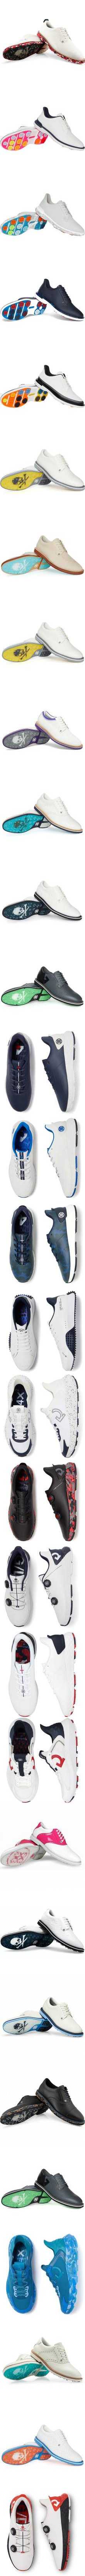 Gallivanter Two Tone Spikeless Golf Shoes - Limited Edition